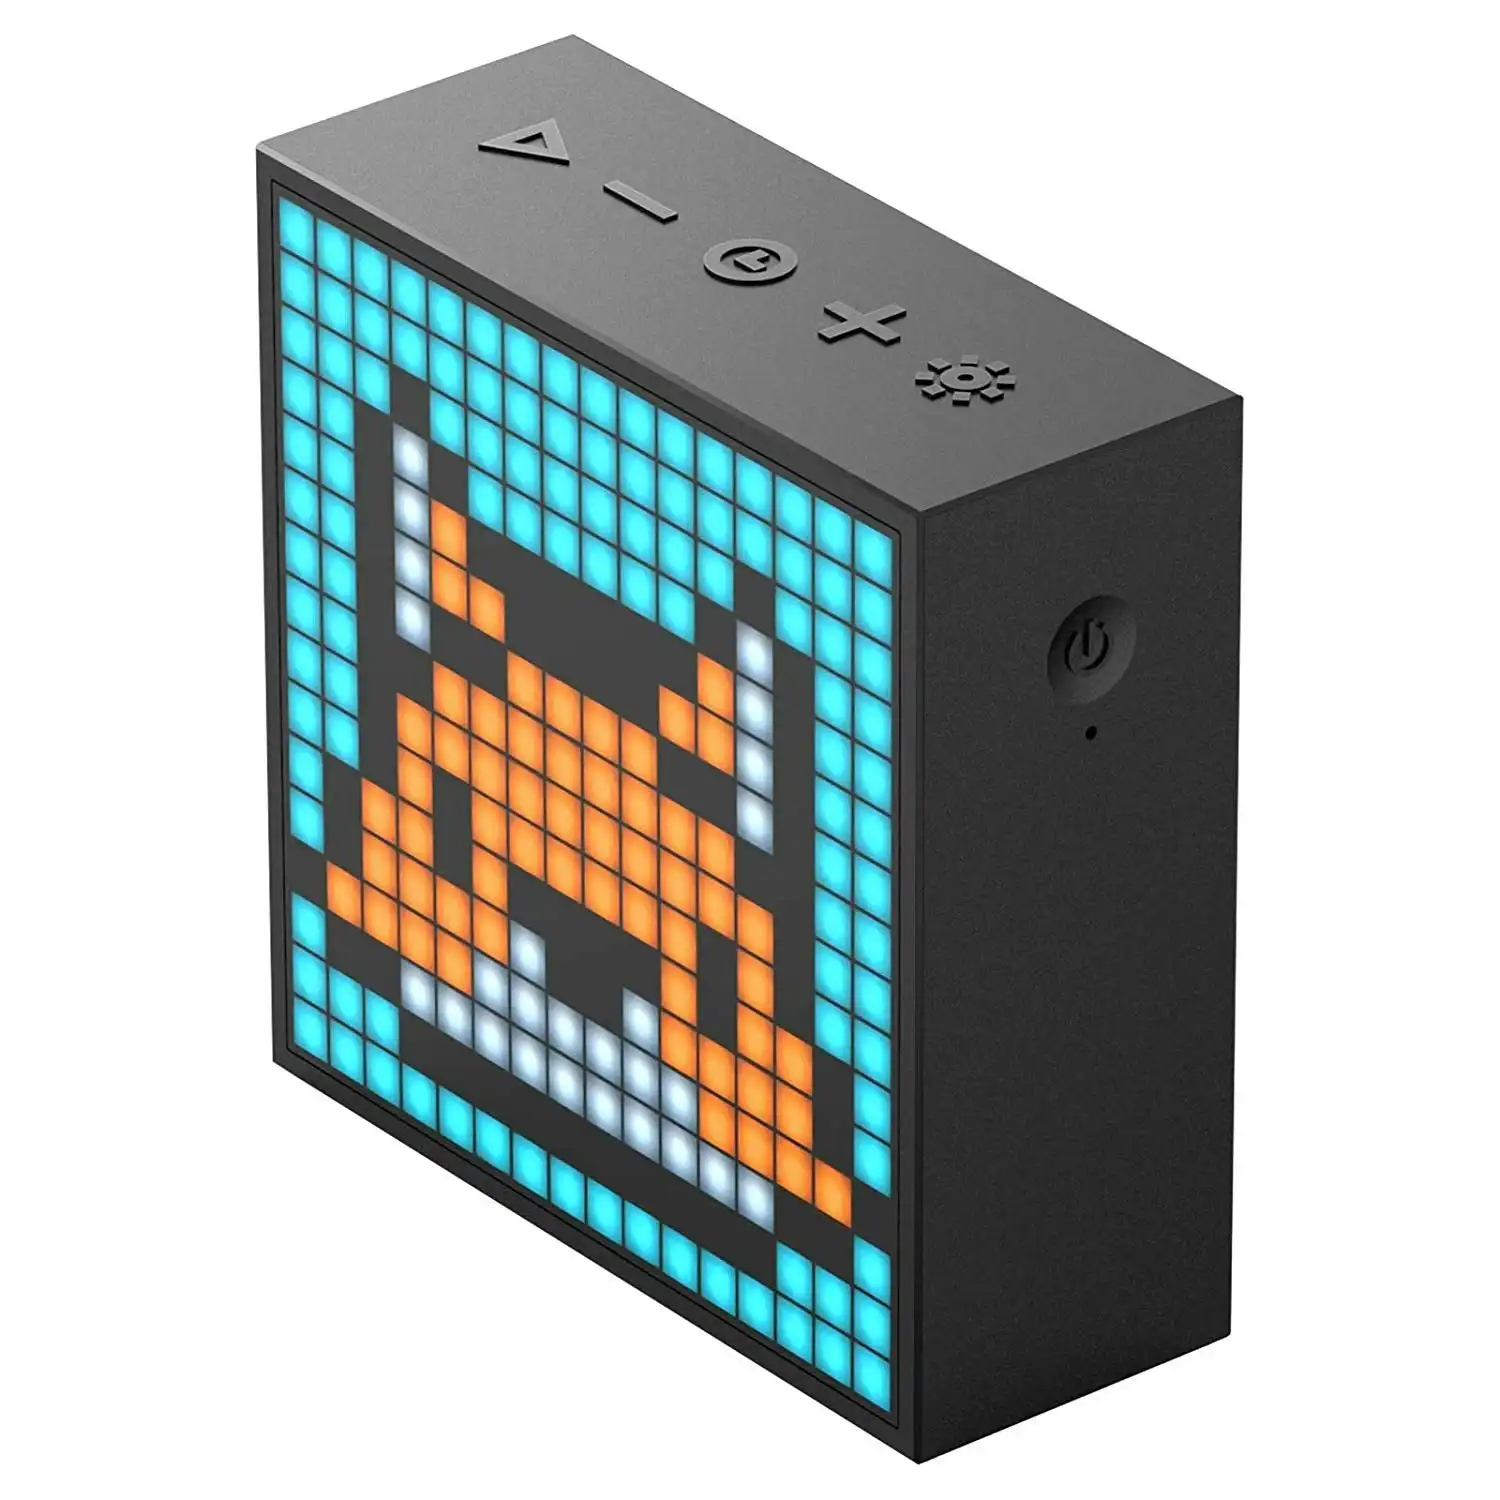 Divoom Timebox Evo Portable Bluetooth Pixel Art Speaker with 256 Programmable LED Panel 3.9 x 1.5 x 3.9 inches